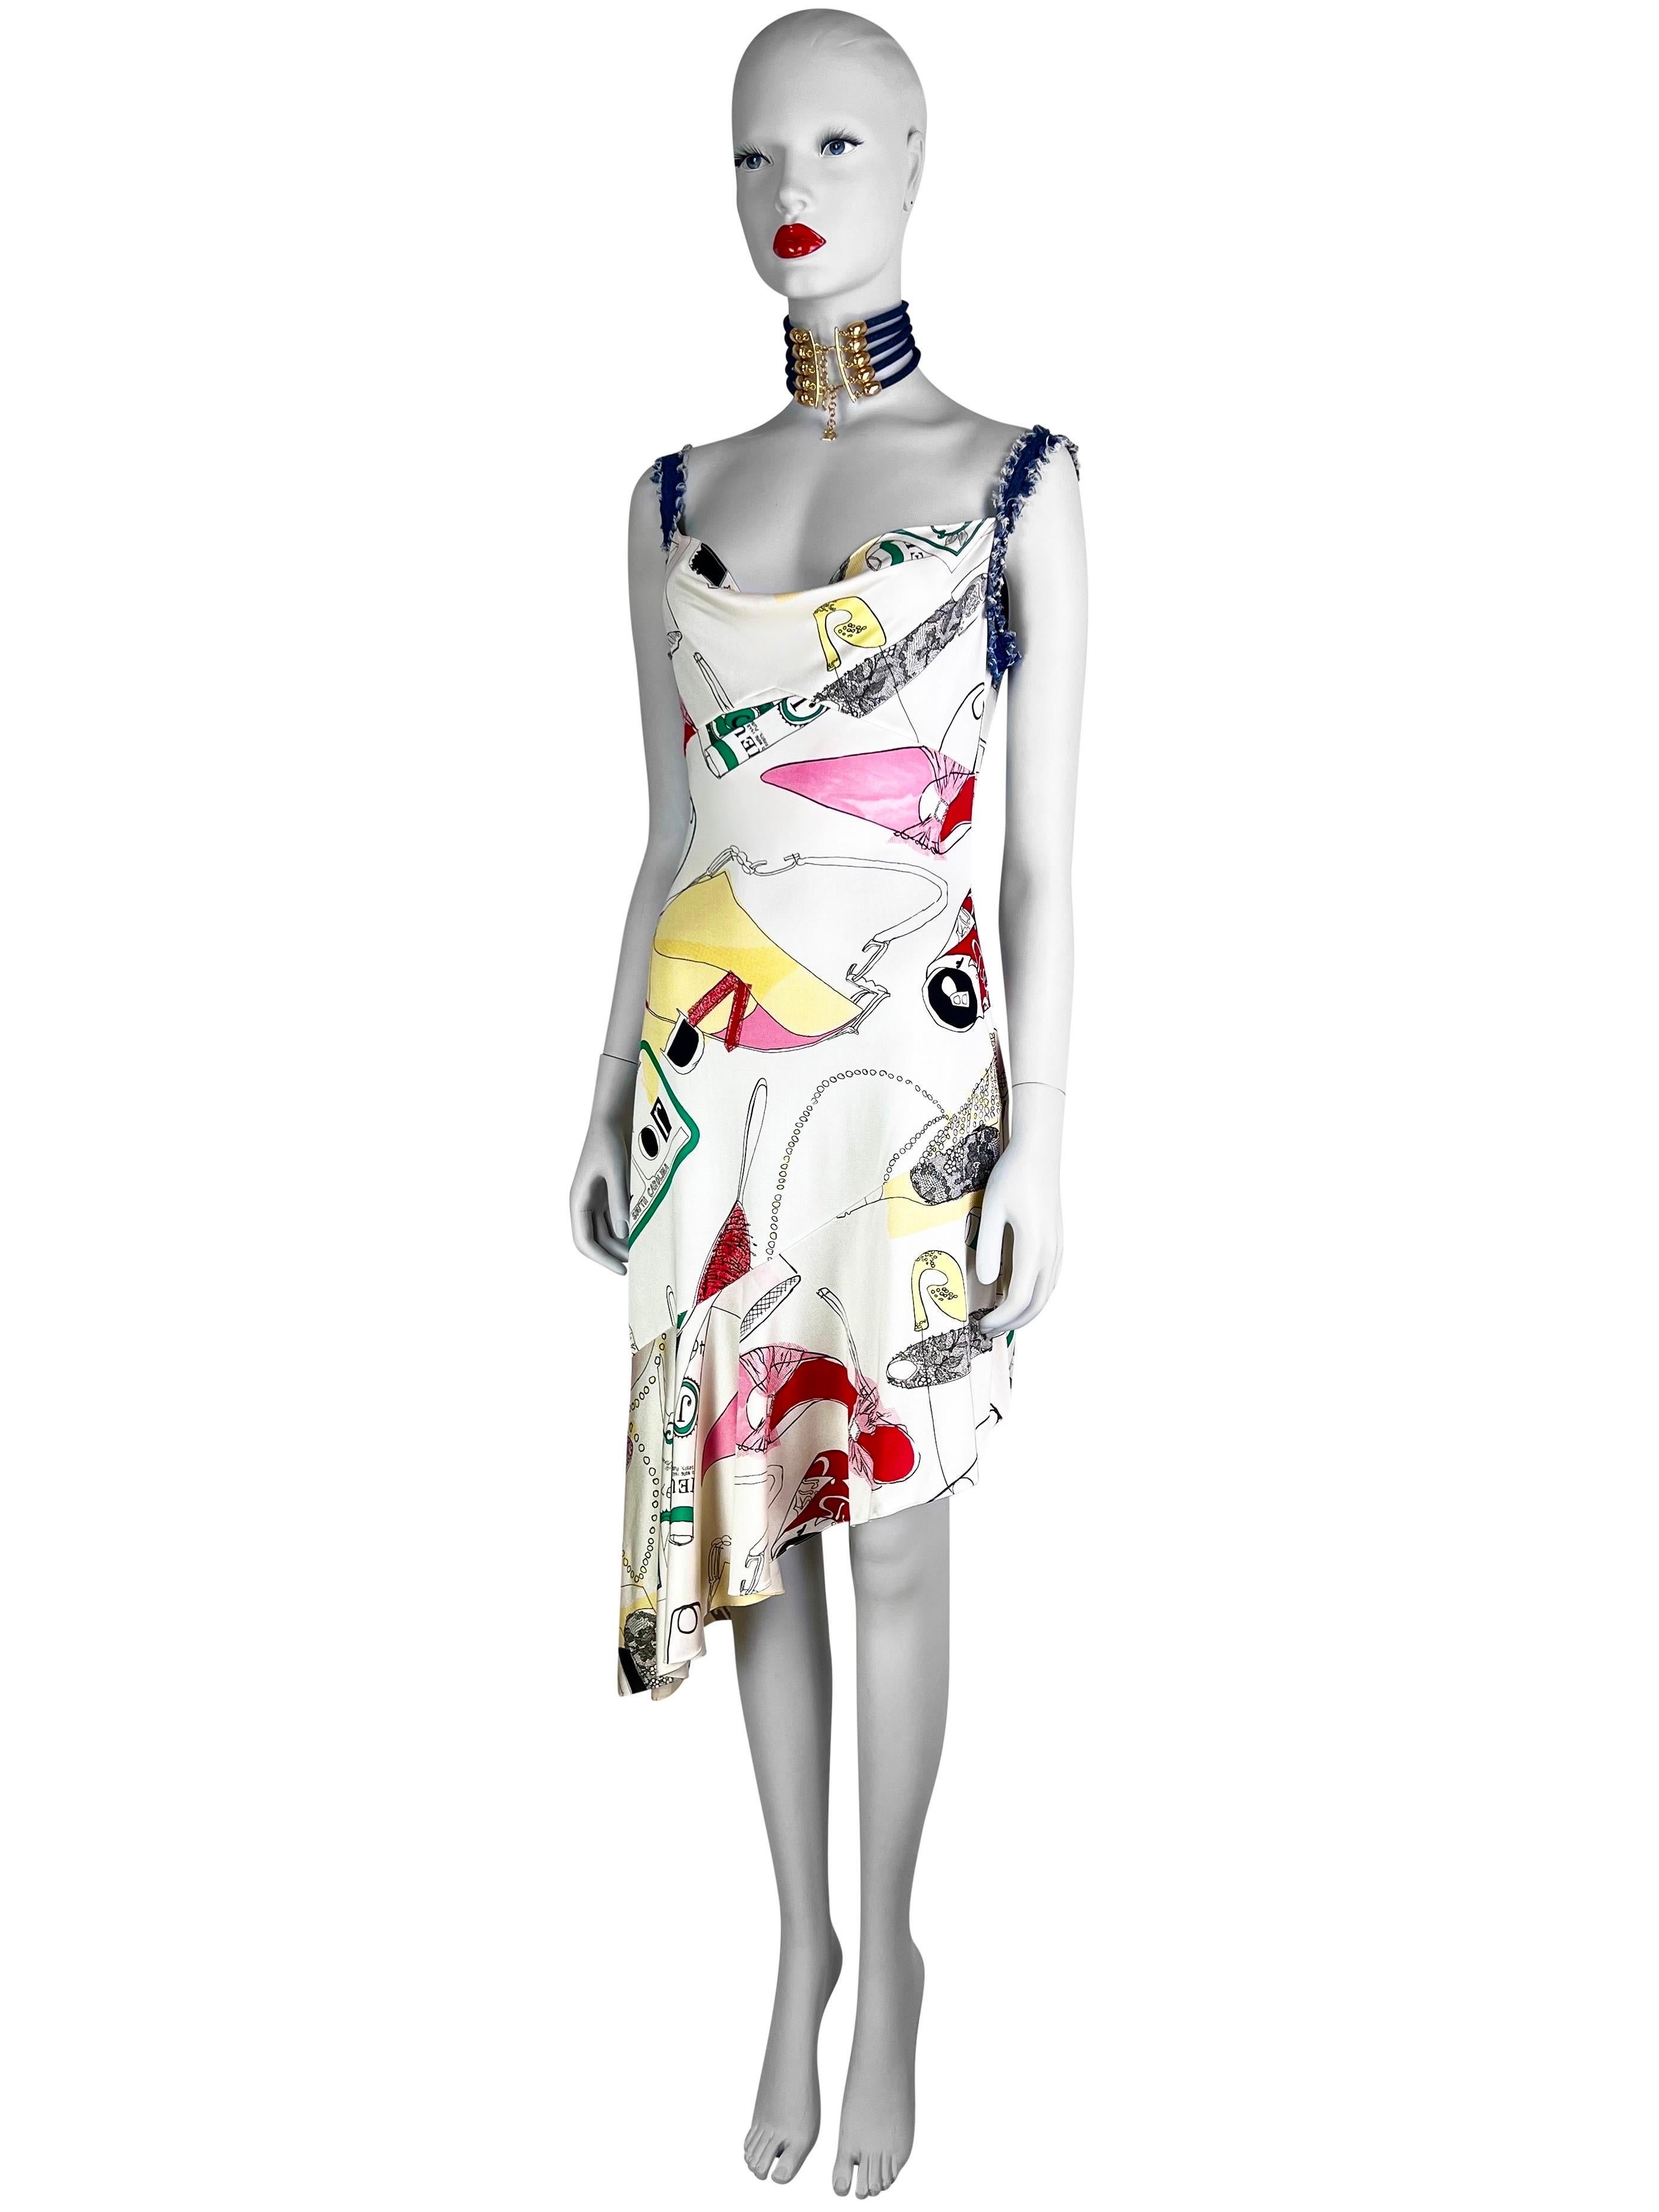 A super fun Dior by John Galliano 100% silk jersey dress with distressed denim straps and the brightest doodle print, featuring Dior logo, a saddle bag and season number 2001, for true fans of the 2000s Dior nostalgia. Super flattering bias cut!